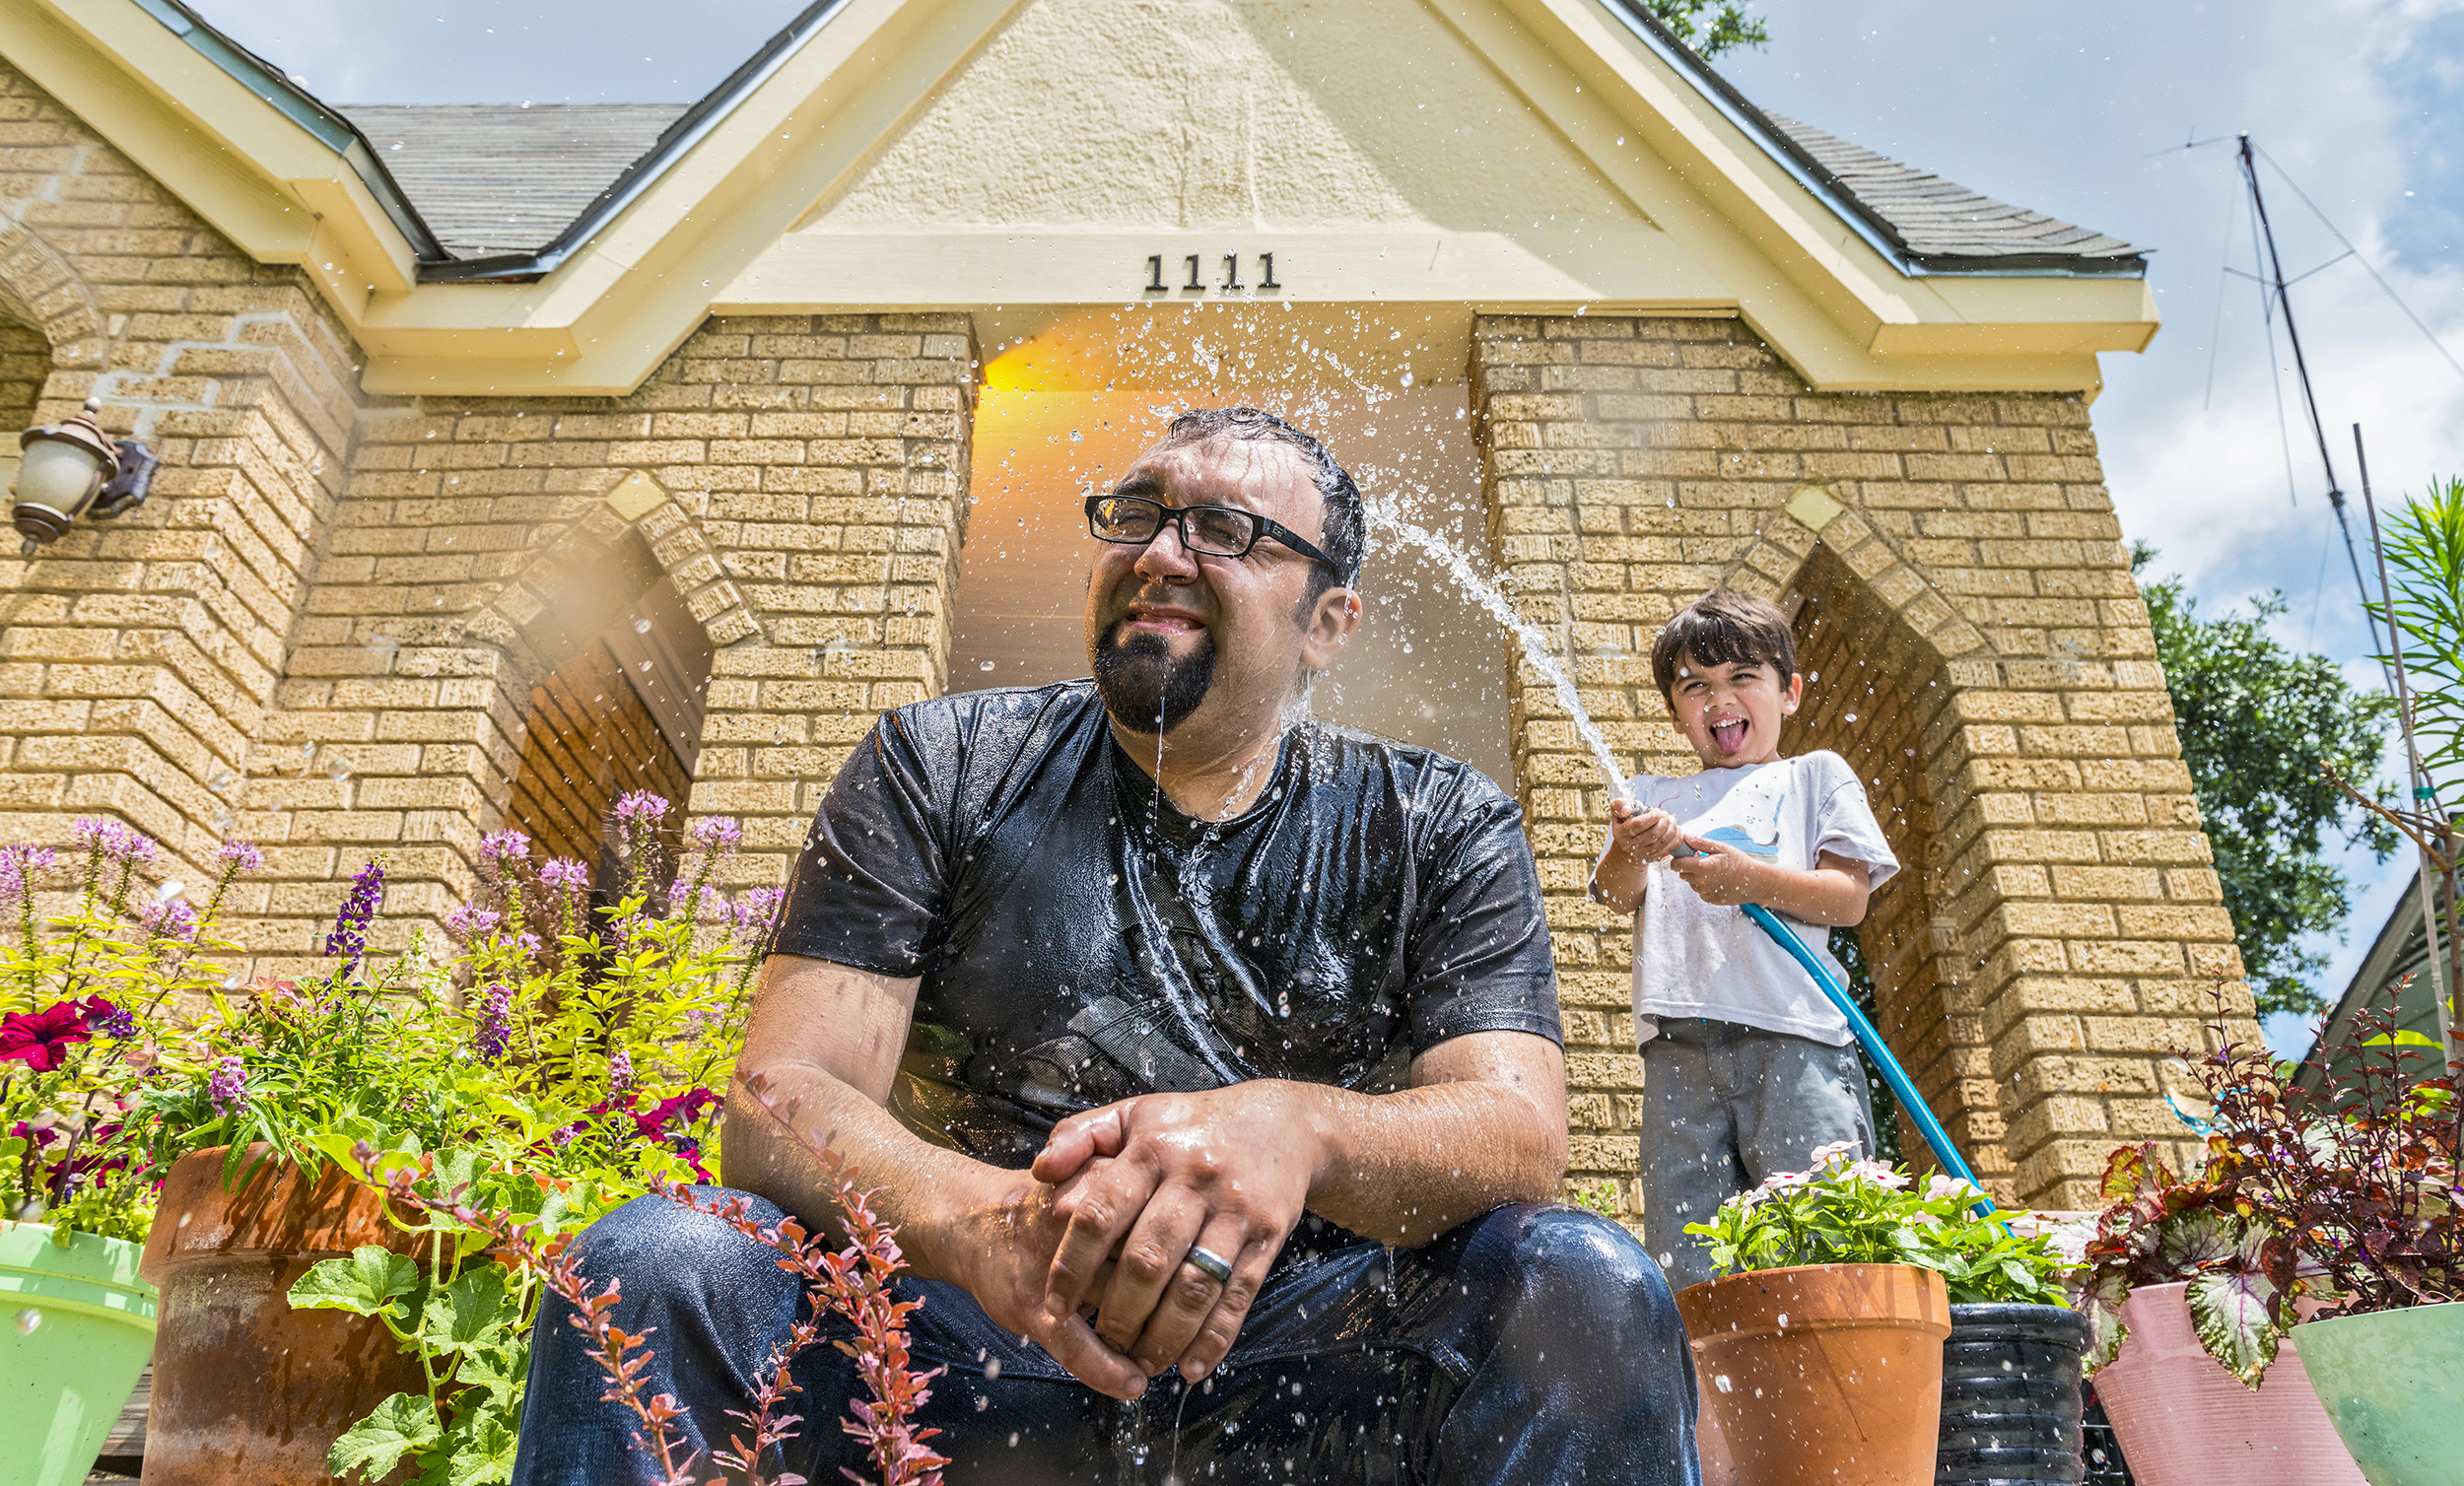  Gmo Tristan savors fatherhood with his 6-year-old son, Luca, at their Oak Cliff home in Dallas, TX.  While studying visual arts at Eastfield College, Tristan worked three jobs, one of which being a catering gig that pushed him toward cooking profess